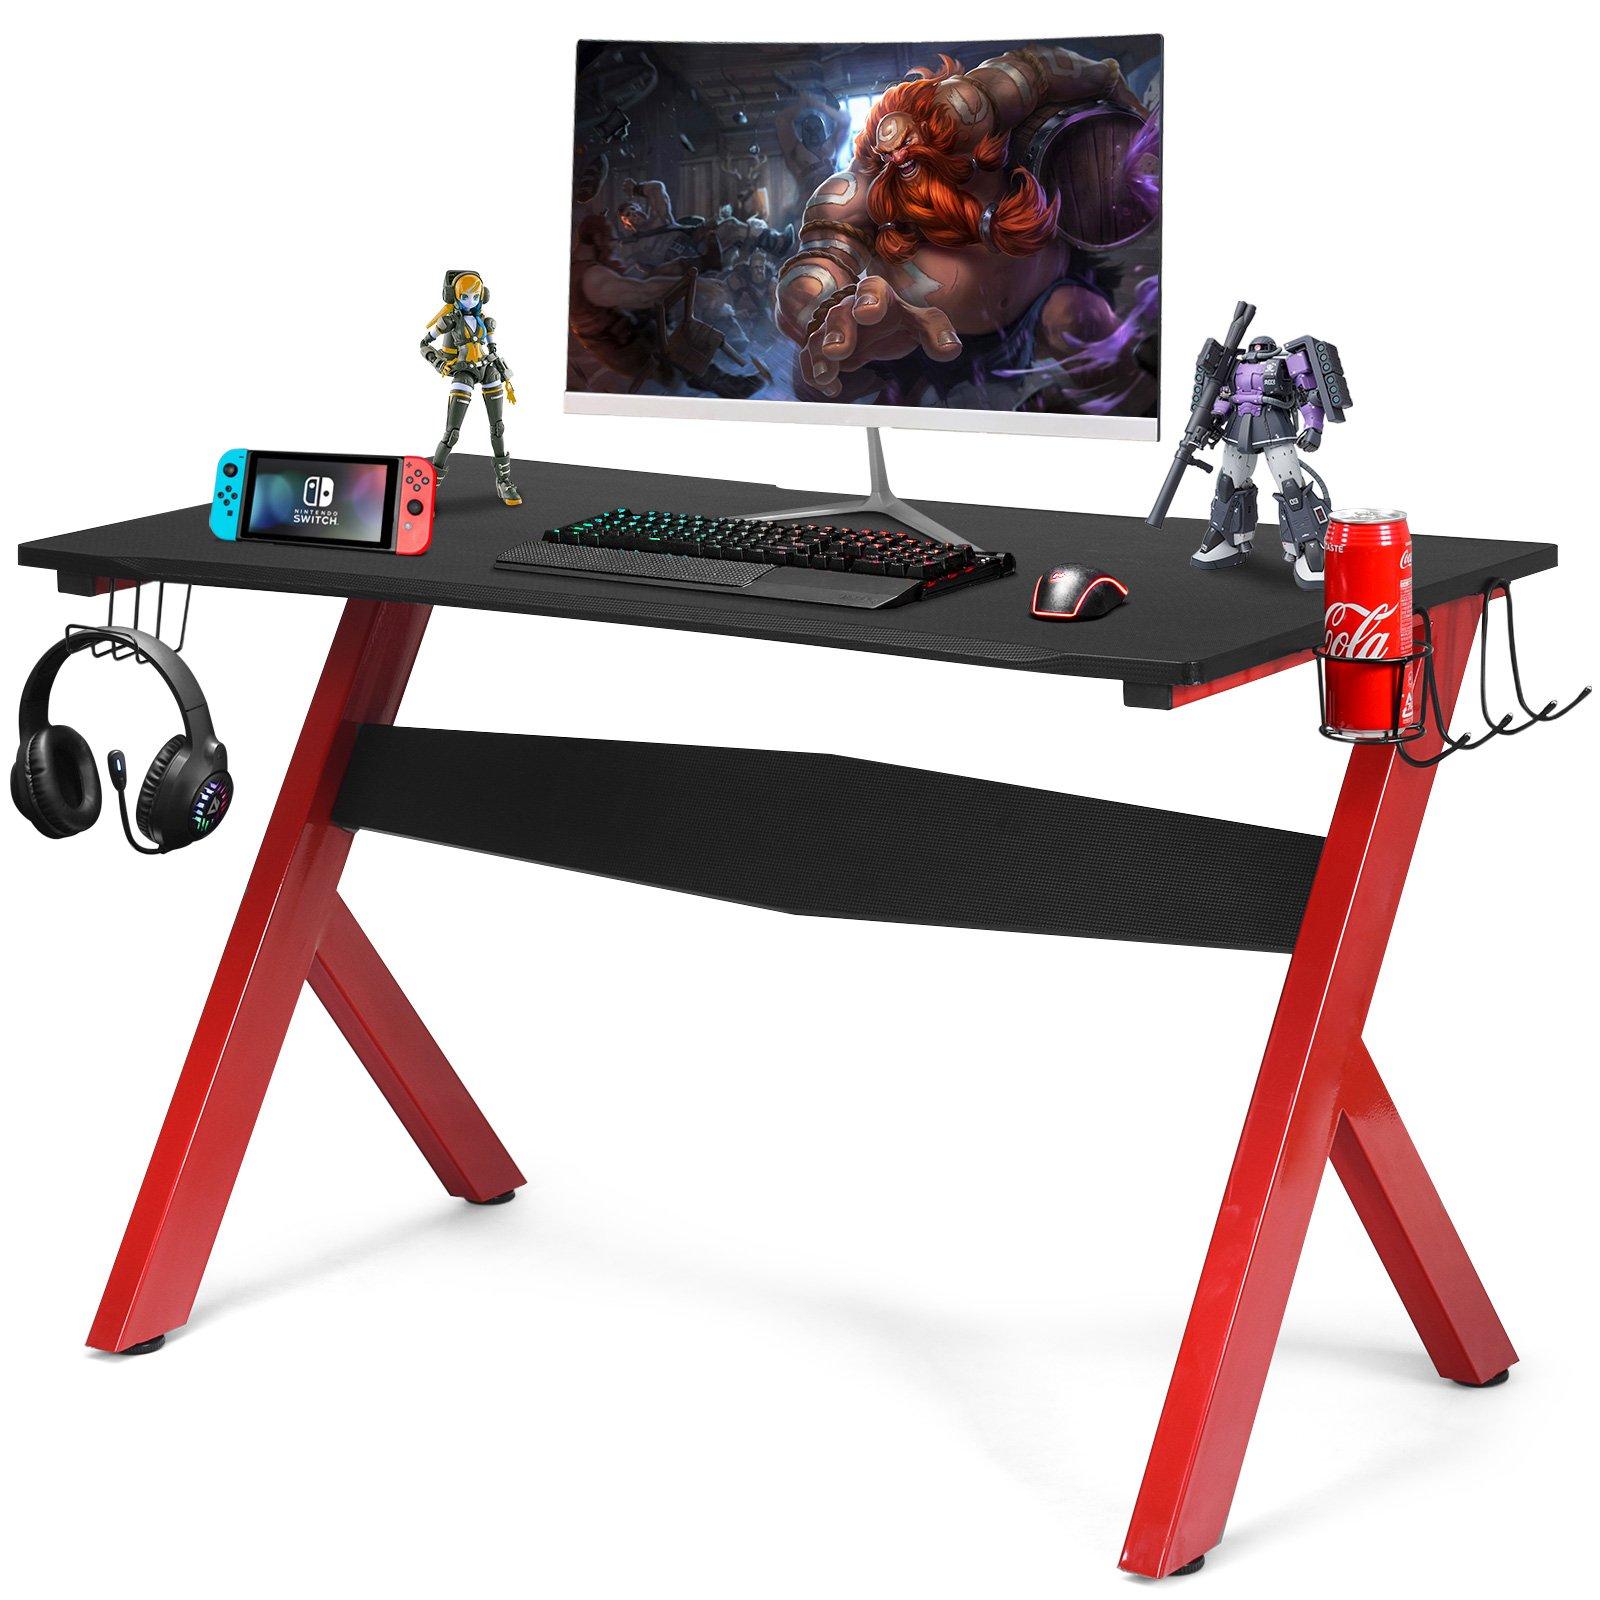 Game Gaming Computer Desk Workstation Ergonomic PC Racing Table W/ Mouse Pad